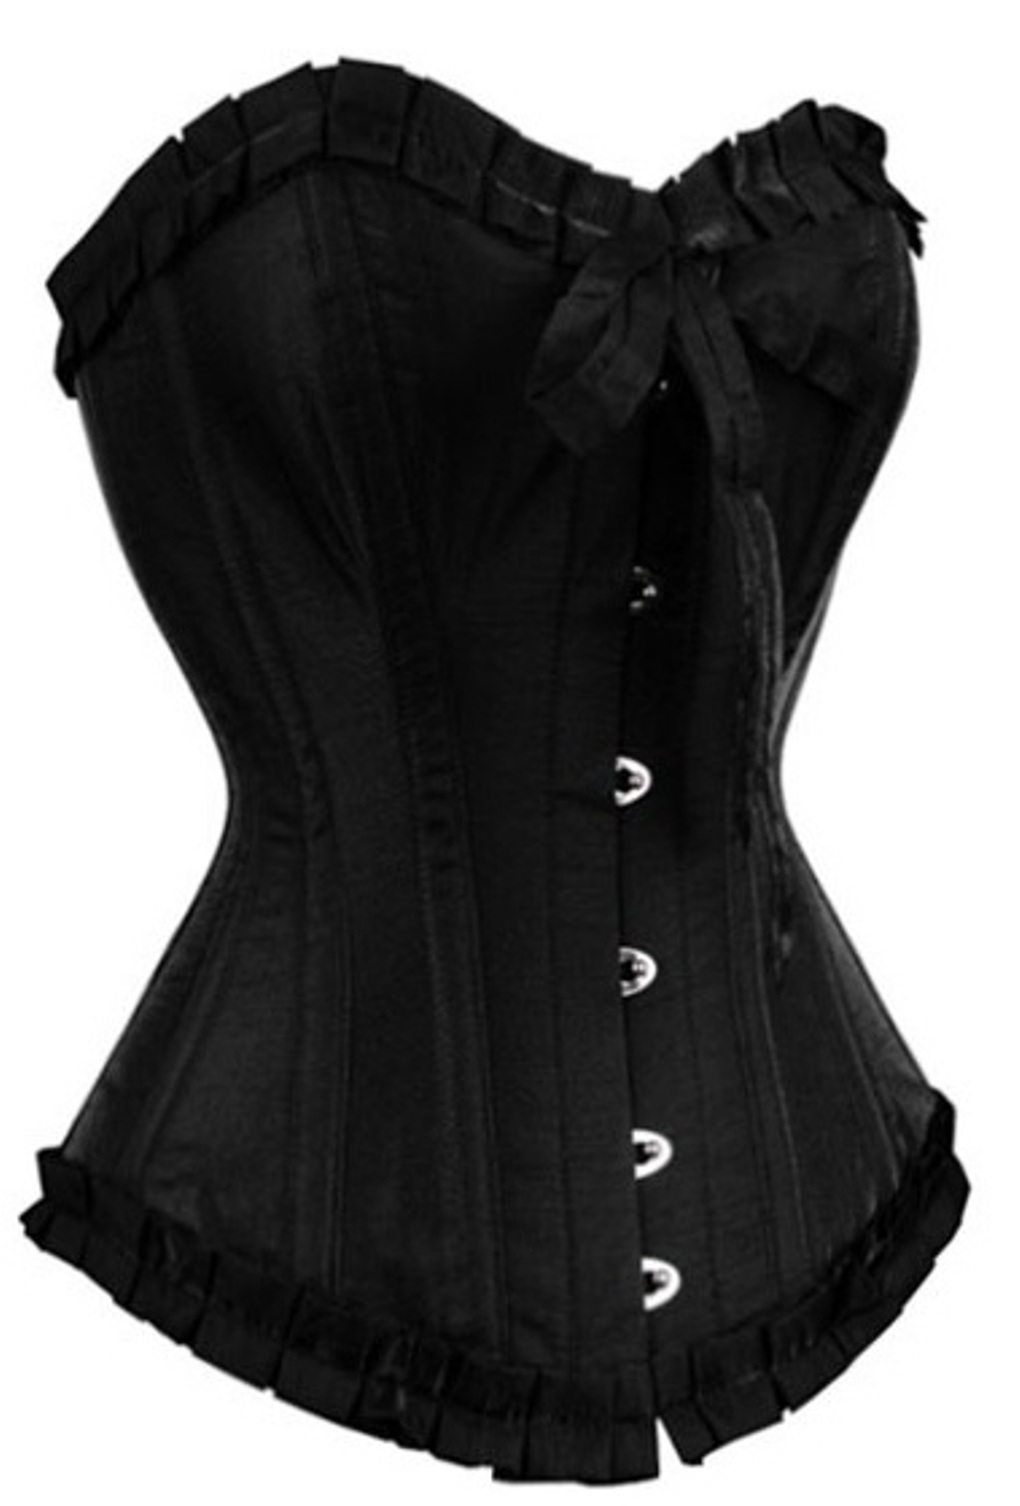 Sexy Steel Lace Up Black Burlesque Overbust Corset